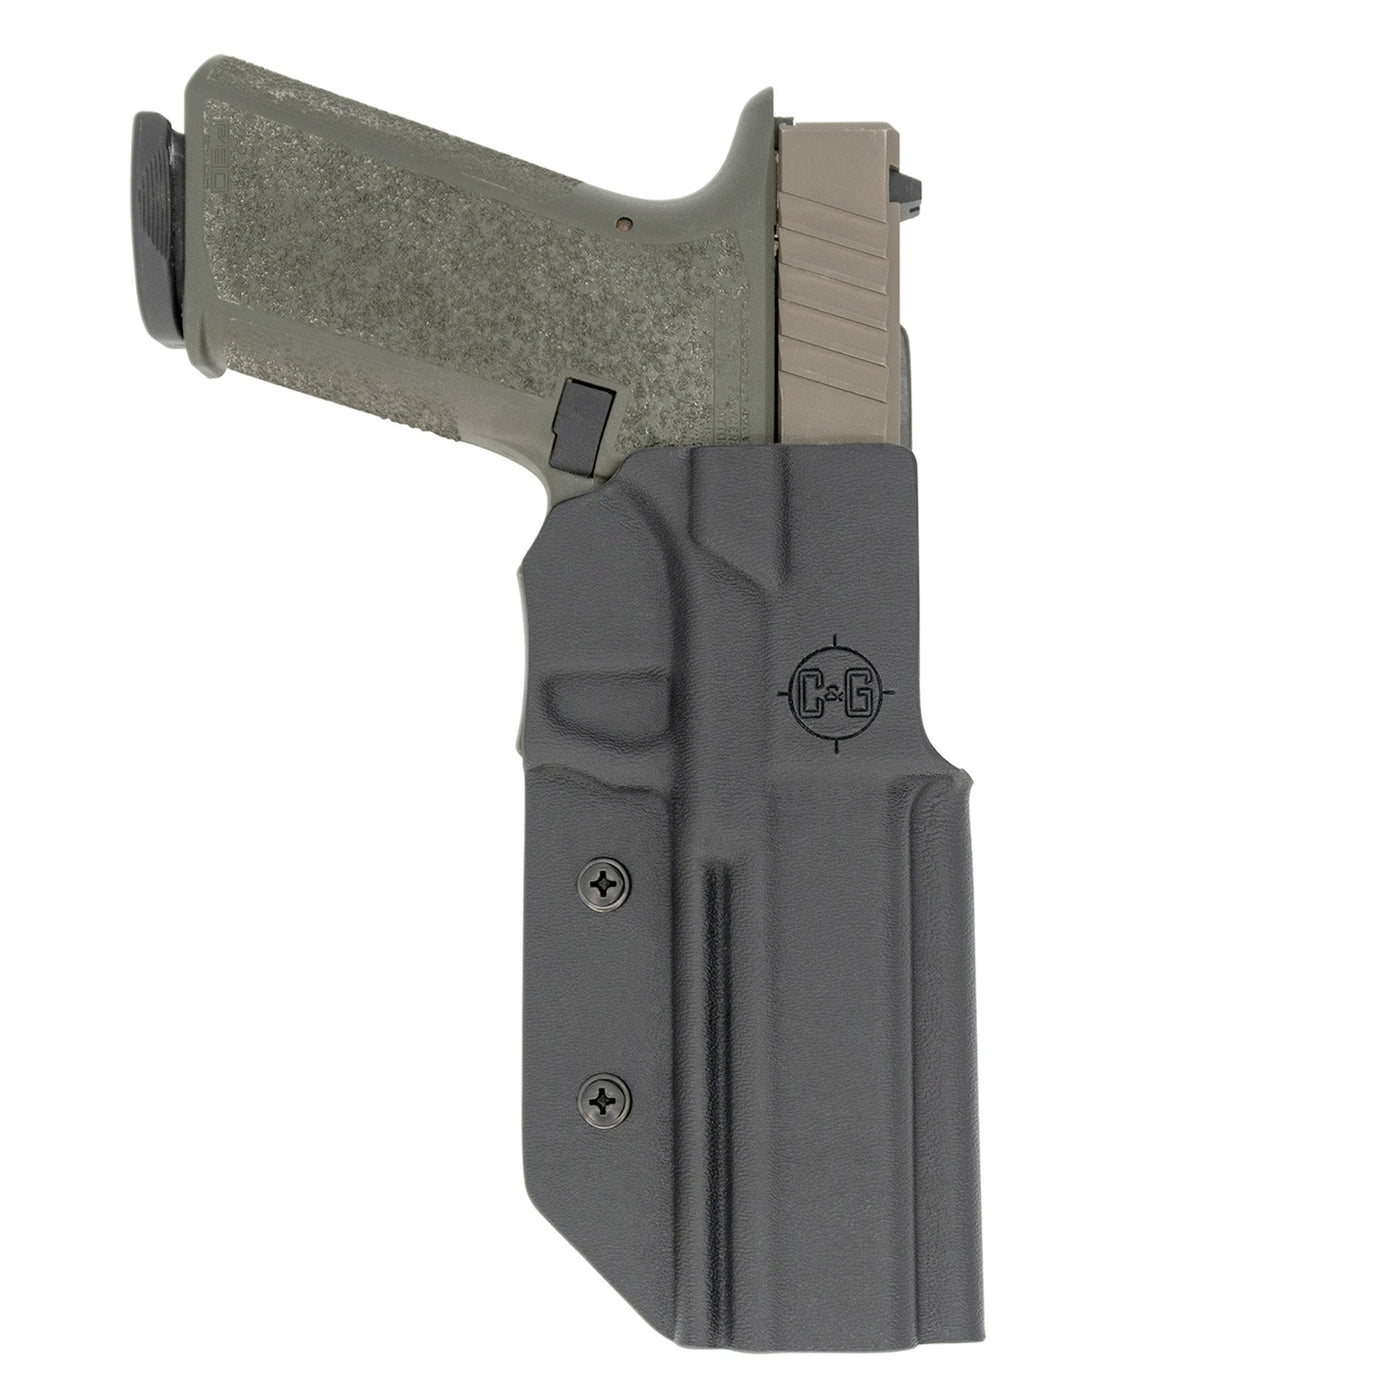 C&G Holsters COMPETITION kydex holster Poly80